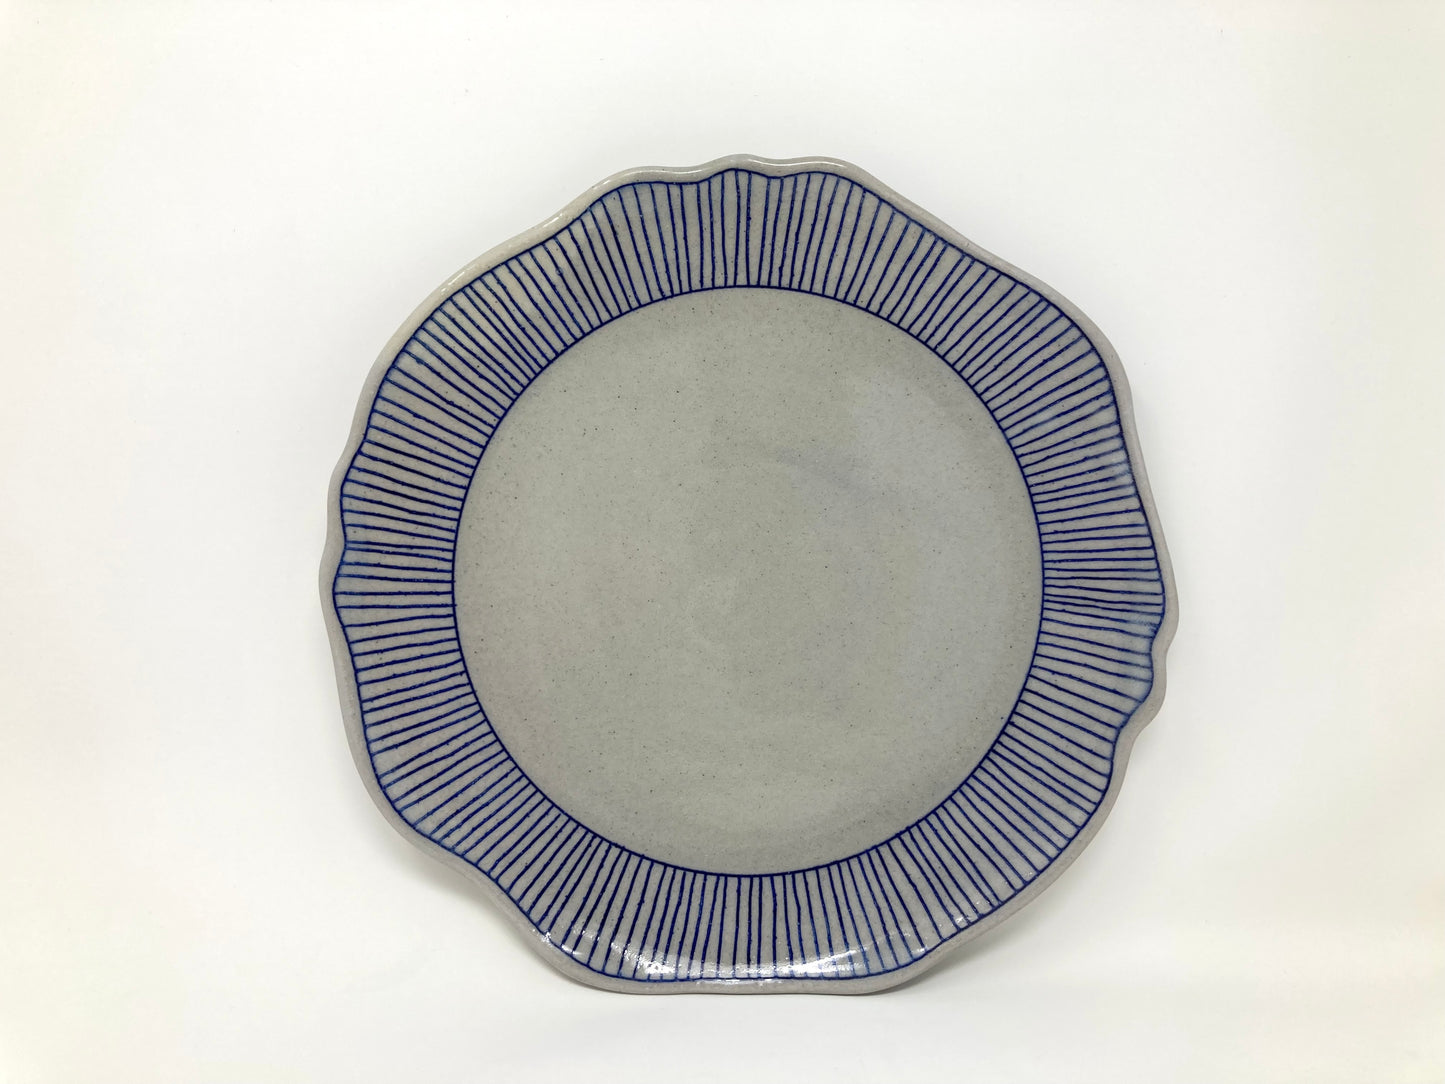 Striped Dinner Plate with Organic Rim in Blue and Gray